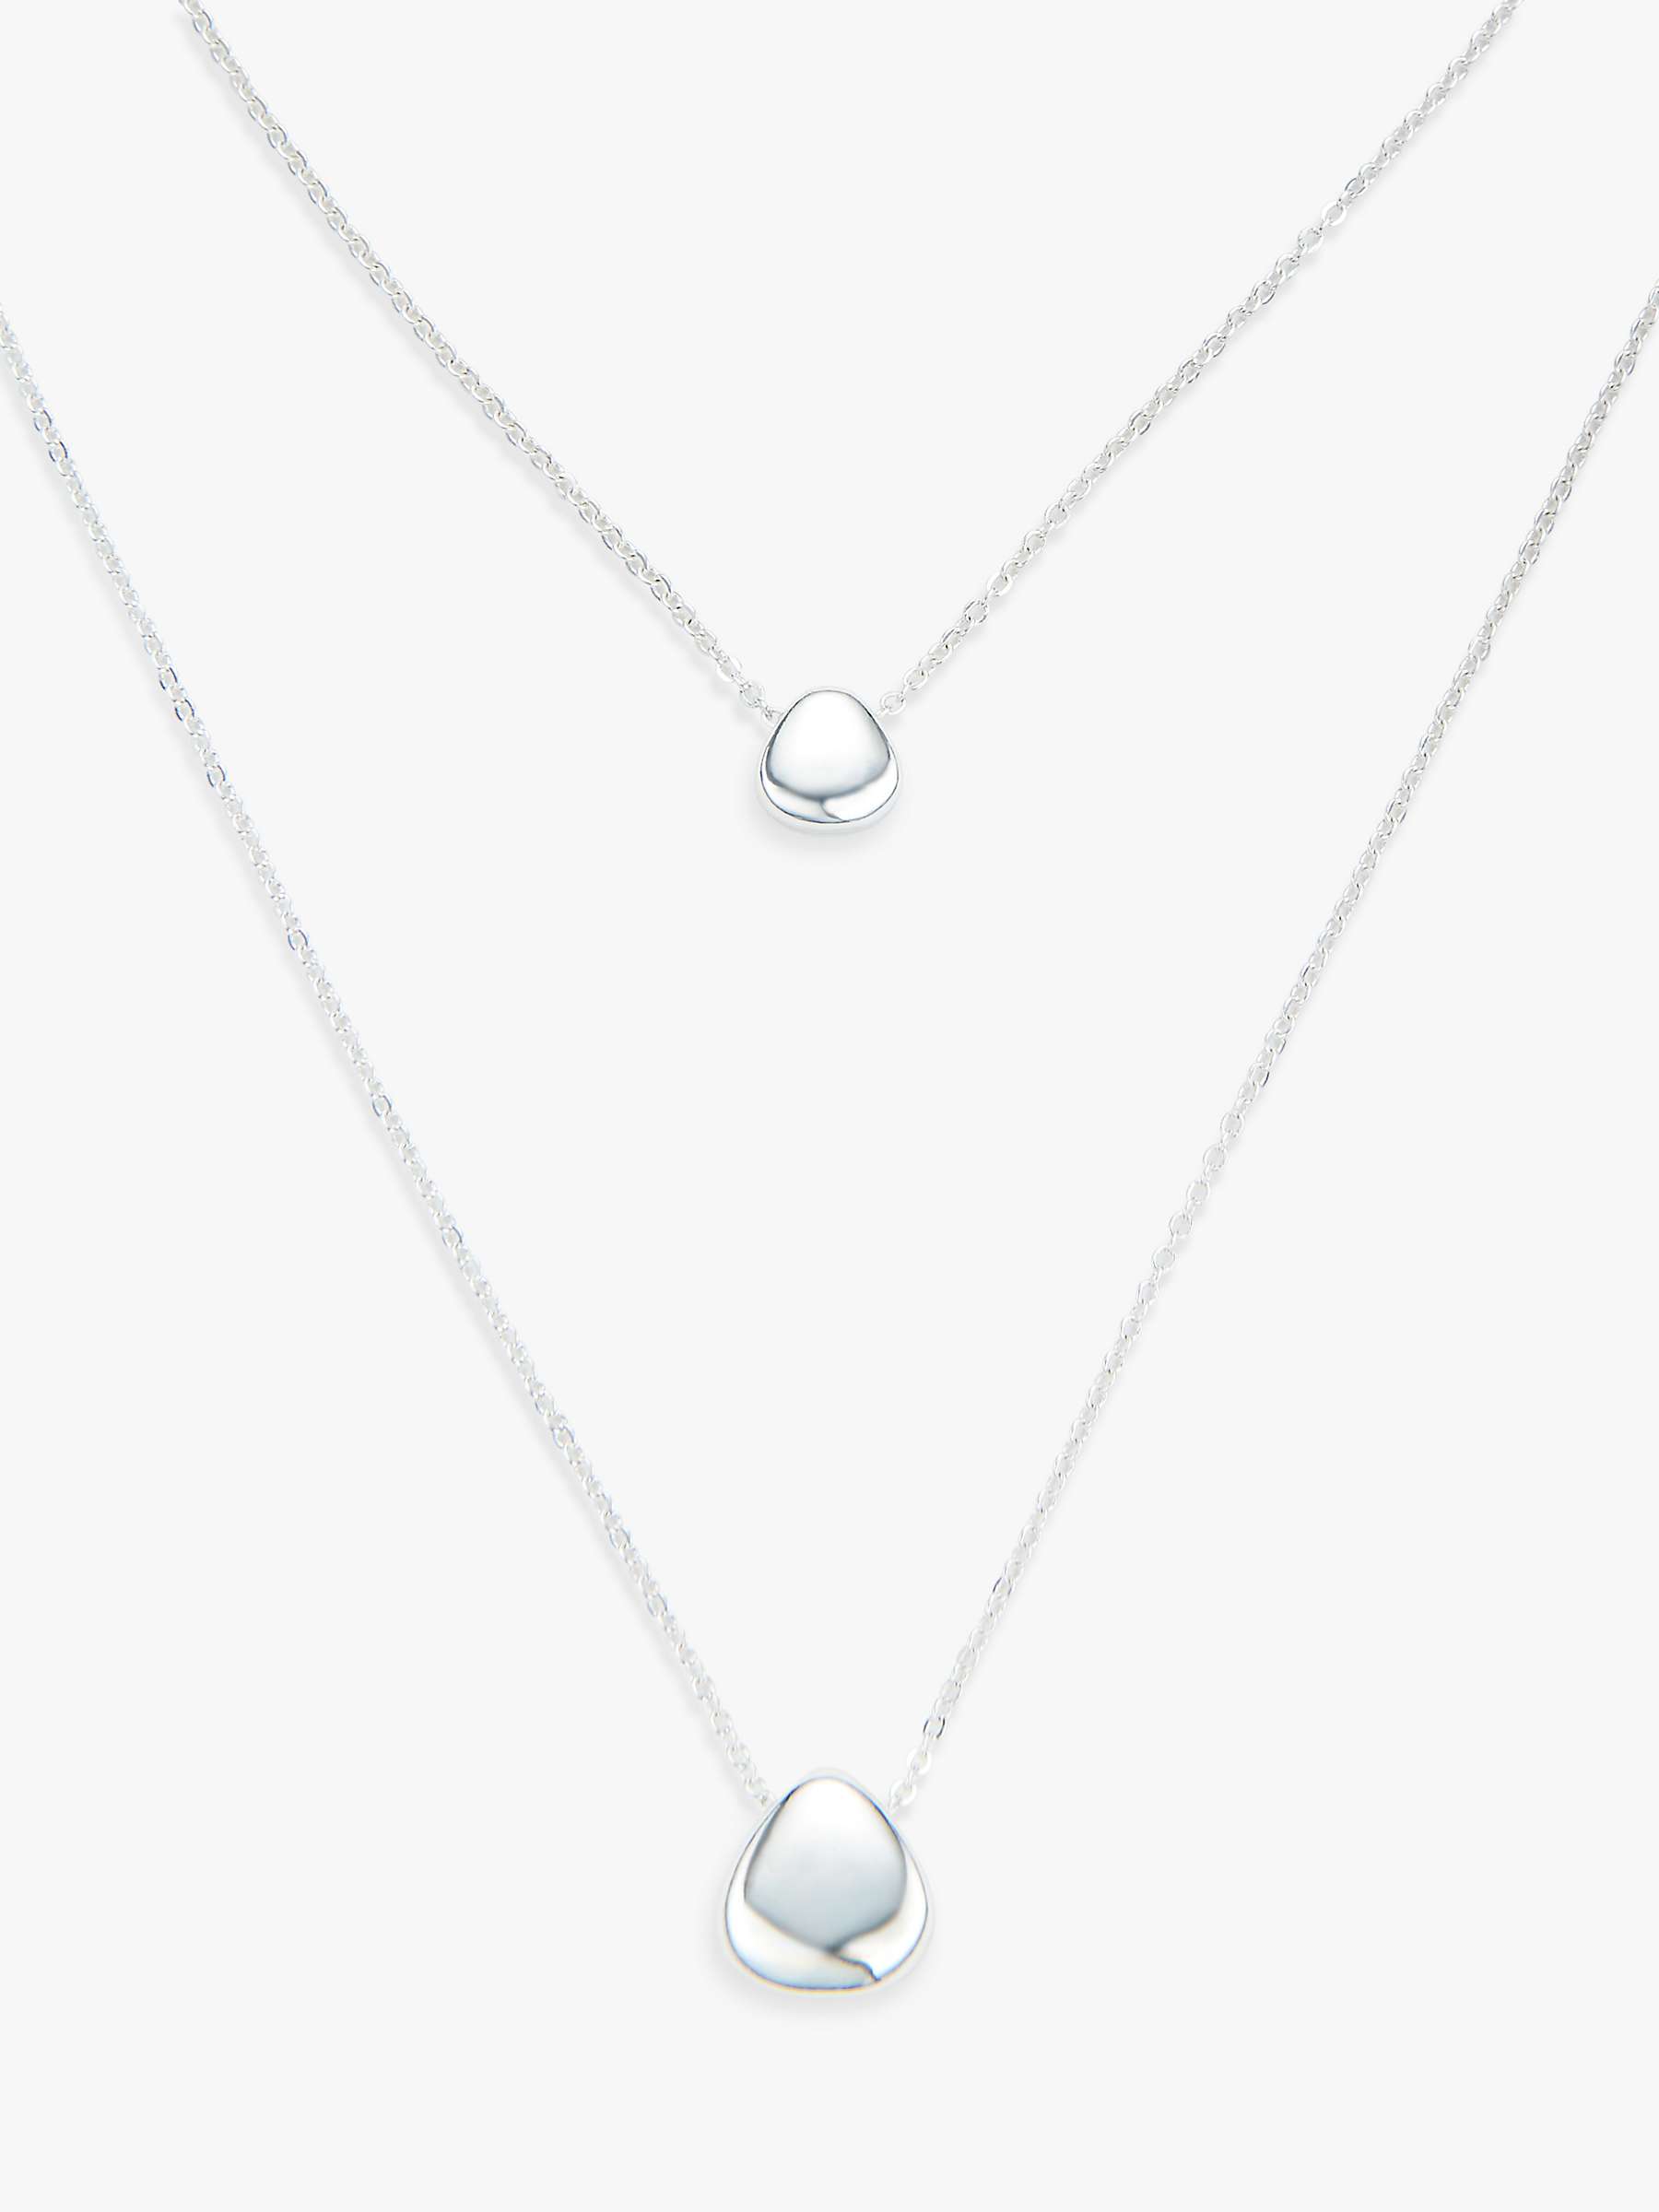 Buy John Lewis Two Row Mini Droplet Layered Necklace Online at johnlewis.com